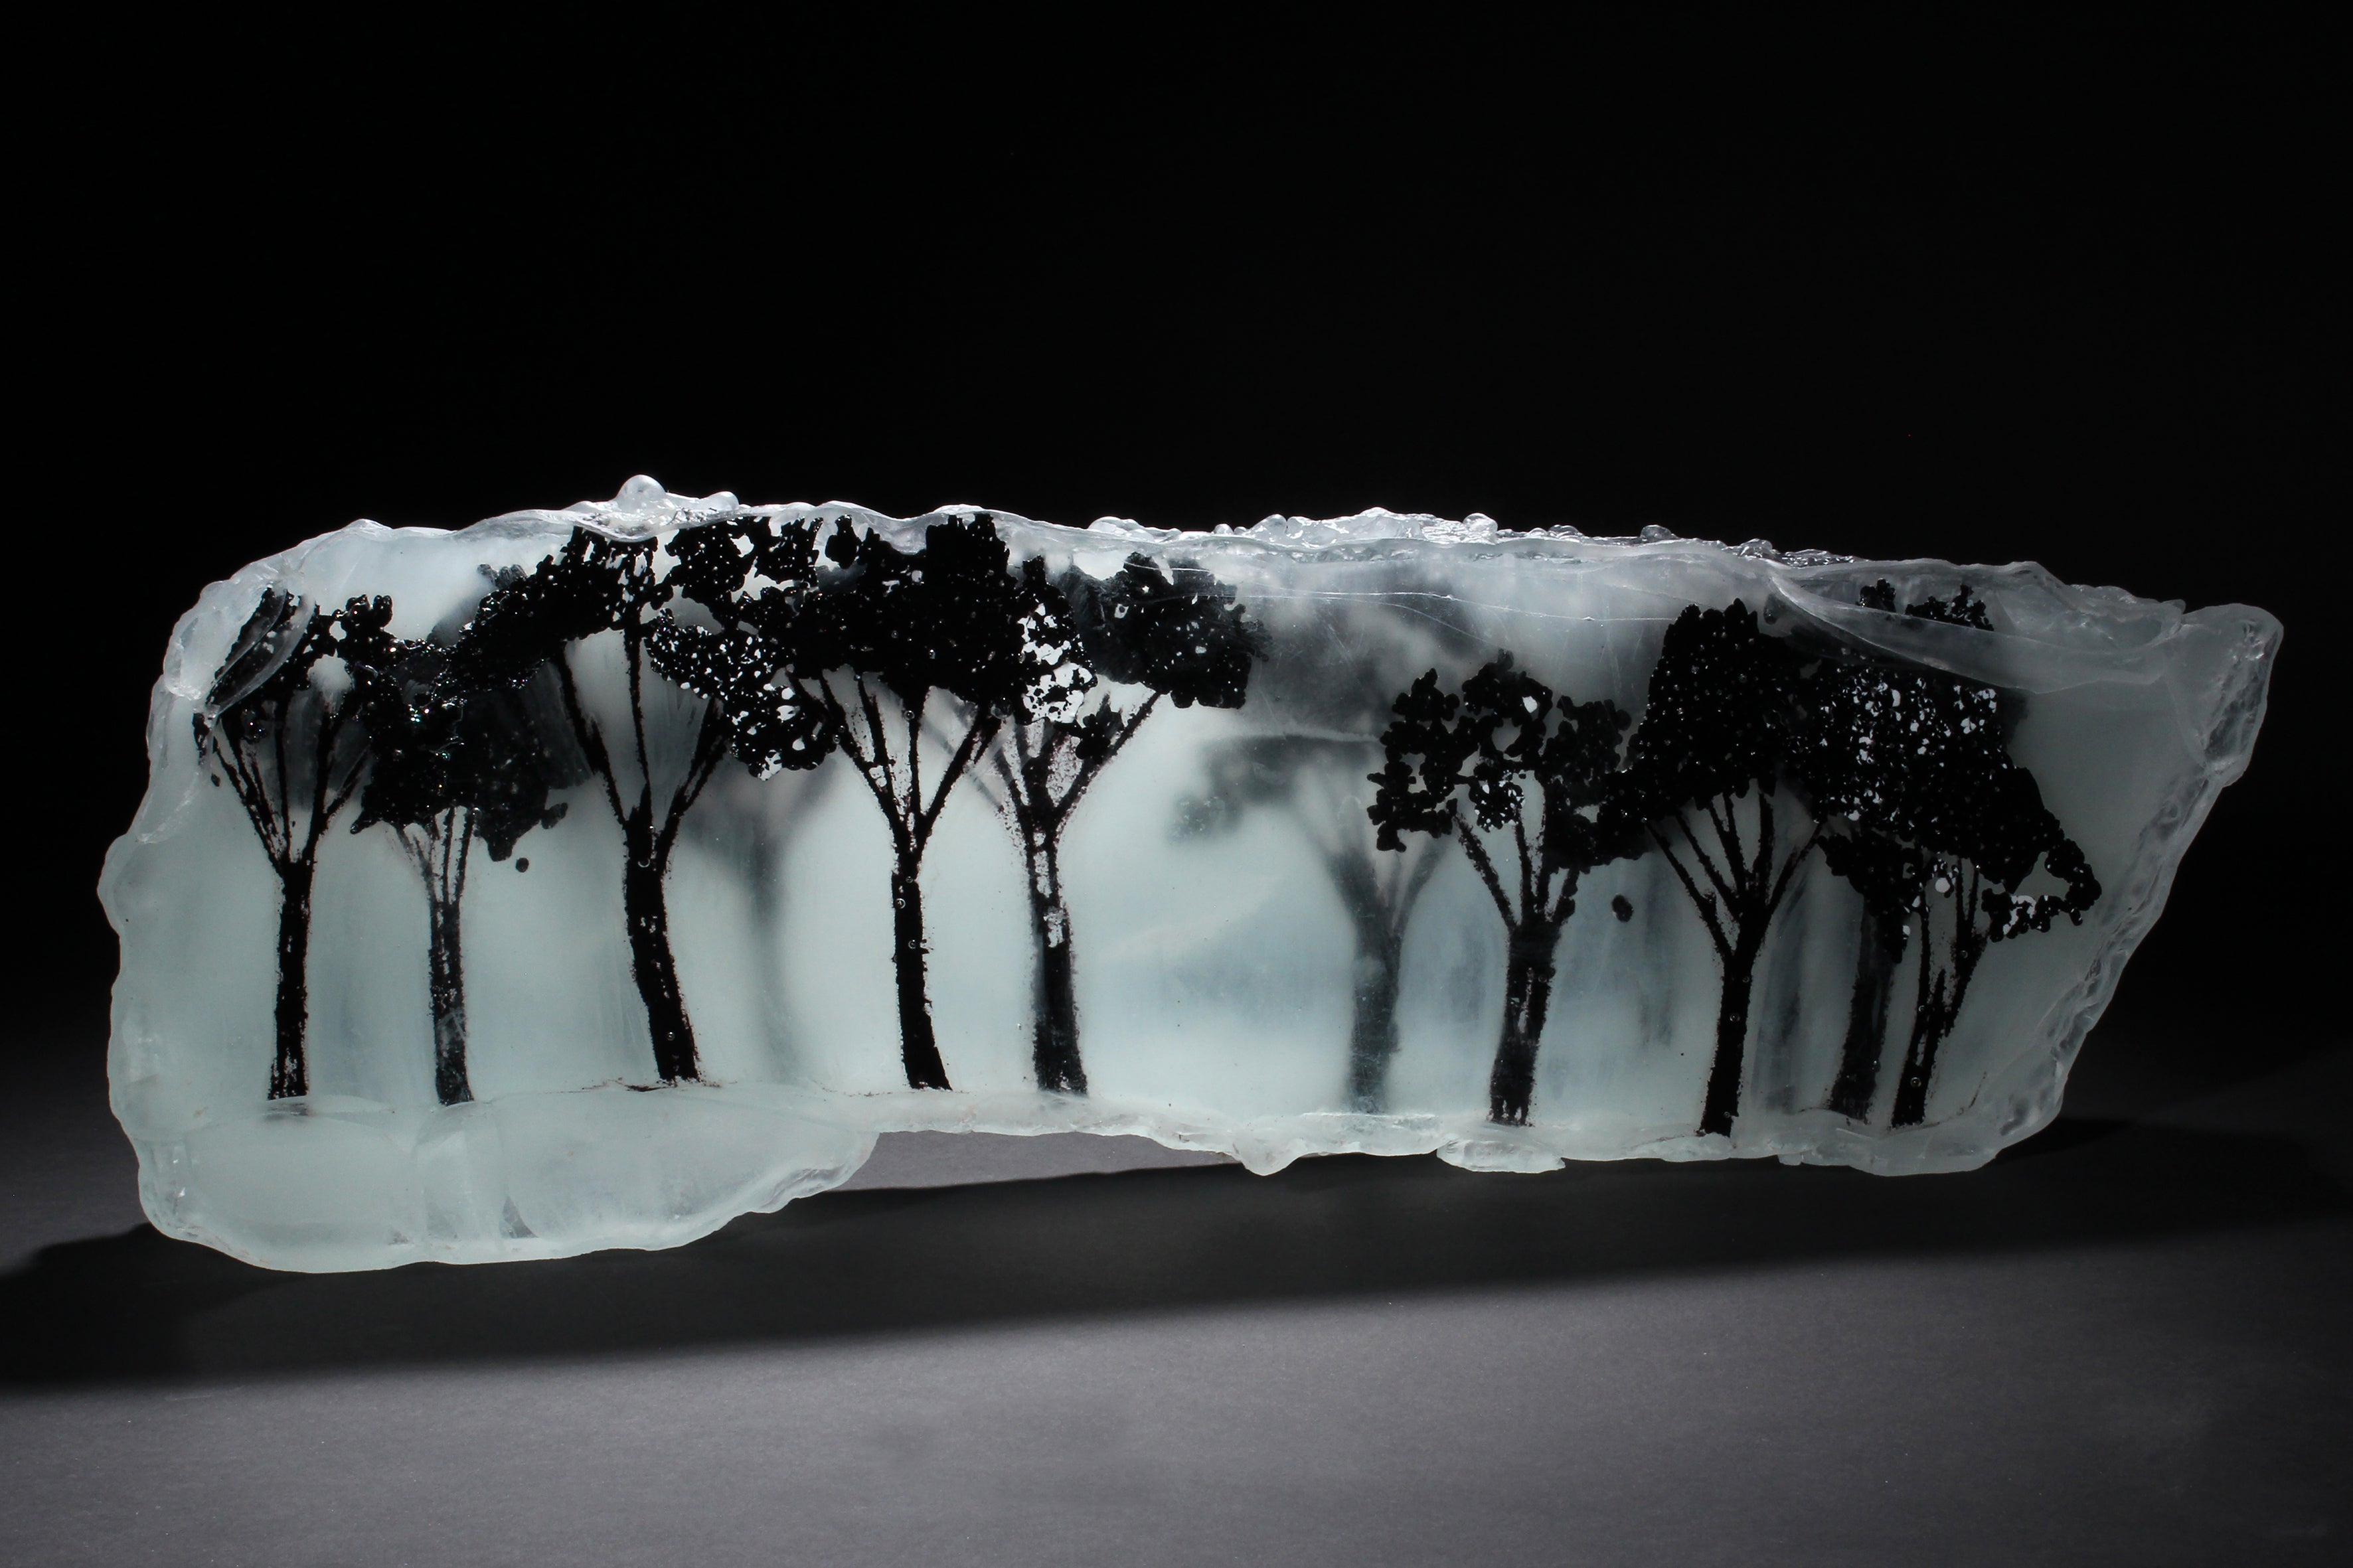 Sarah Brown, Descending Fog, Cast glass with fused glass inclusions, £1,900